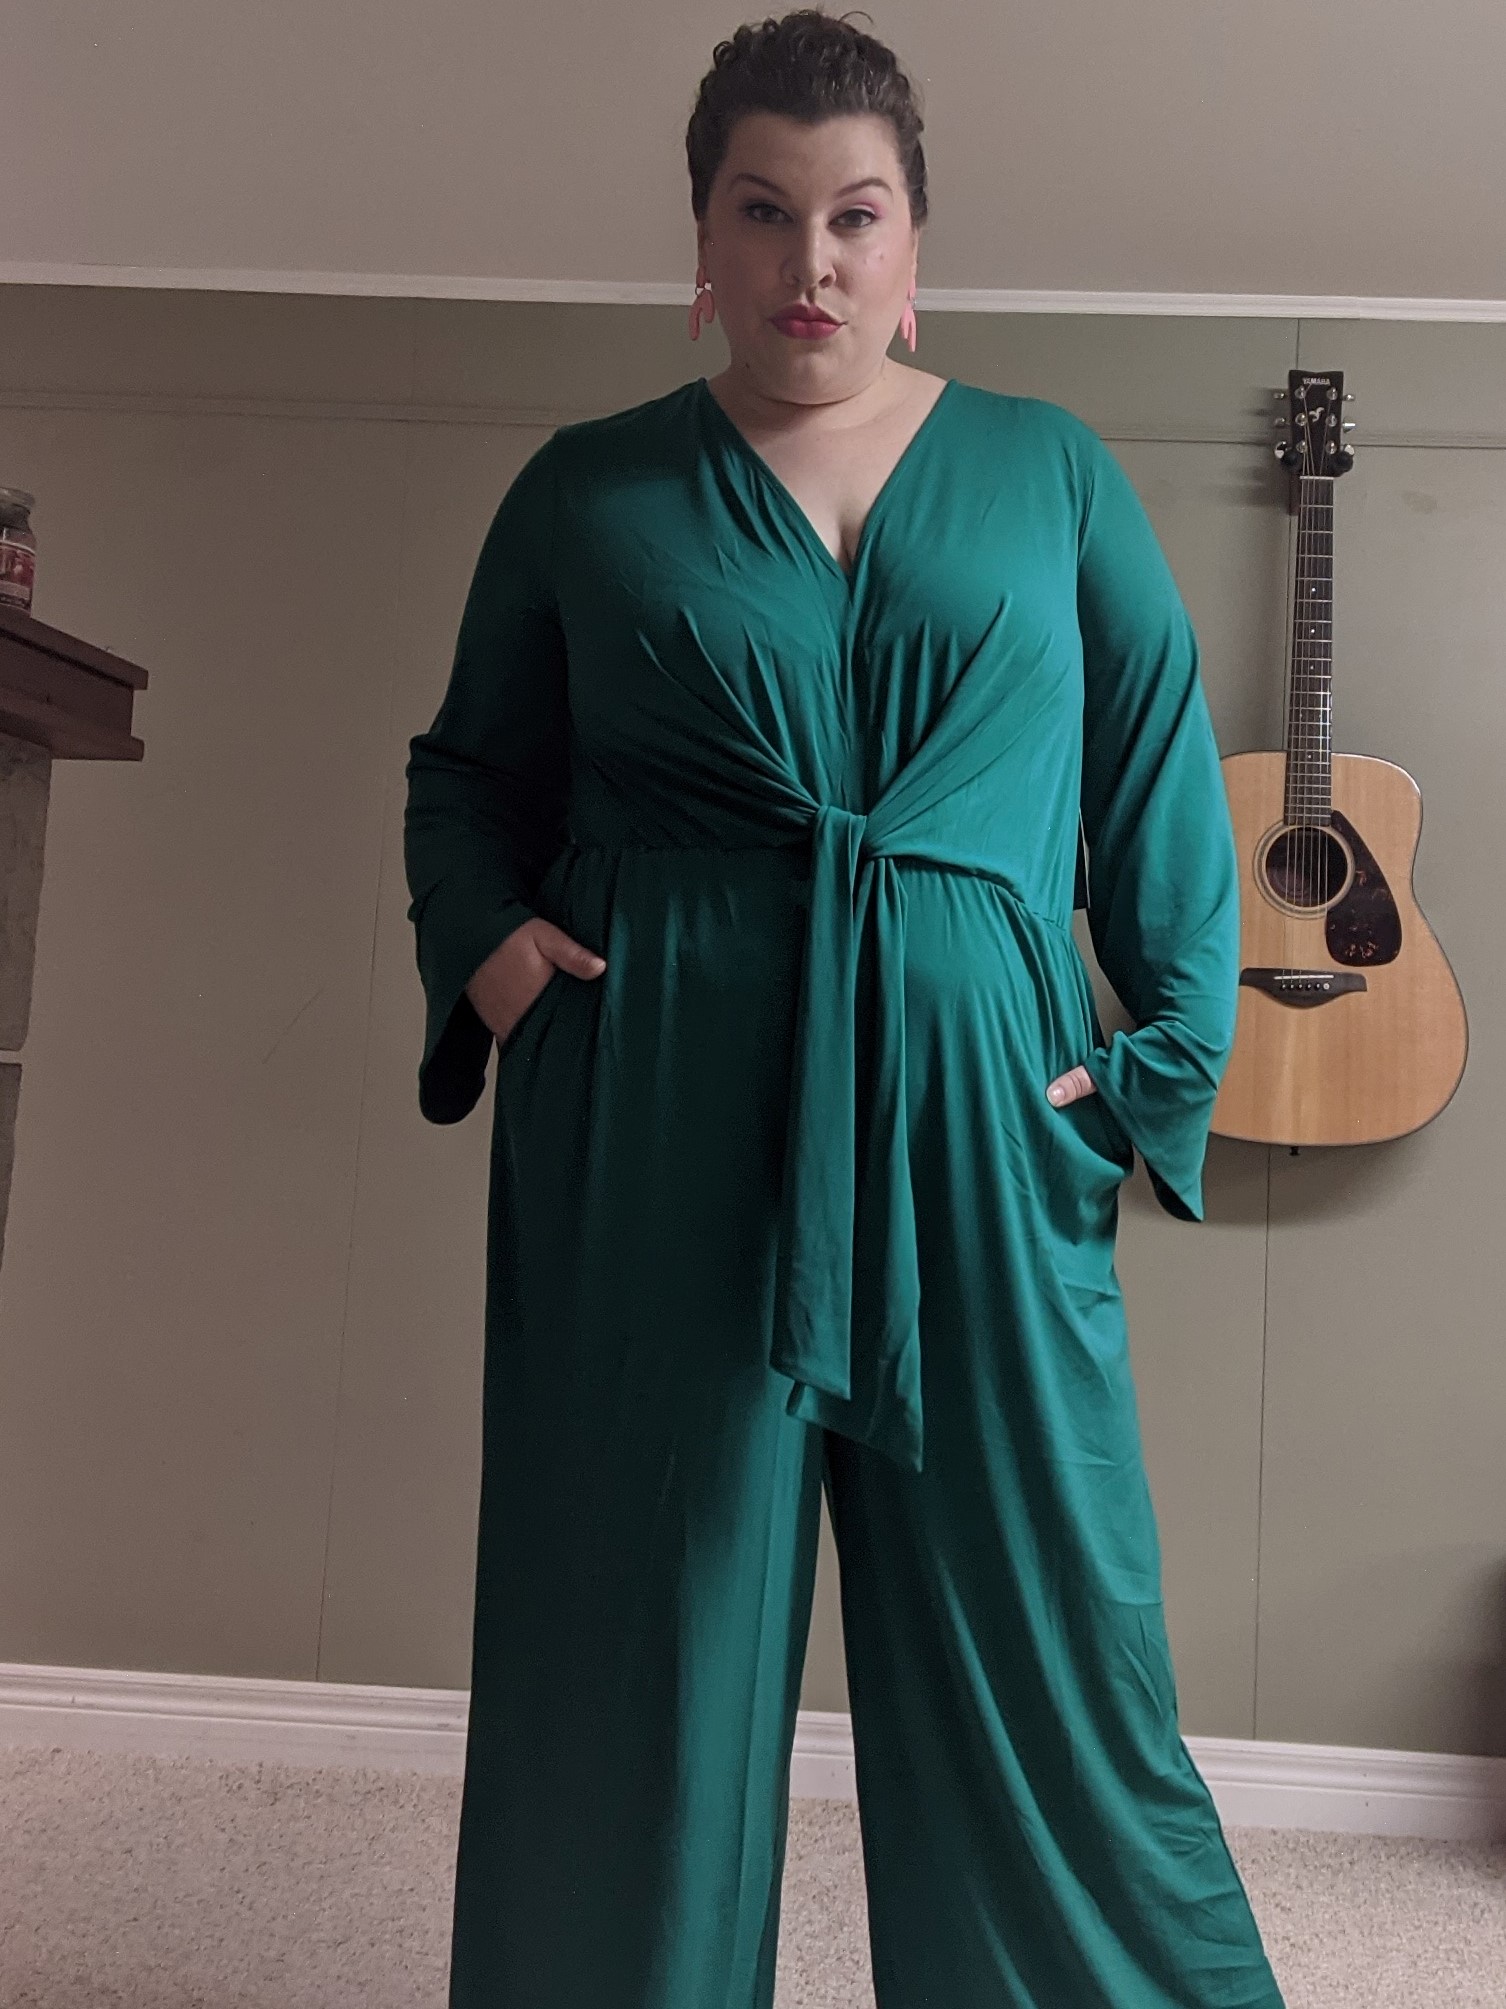 Lora wearing a drapey emerald green jumpsuit with long sleeves.